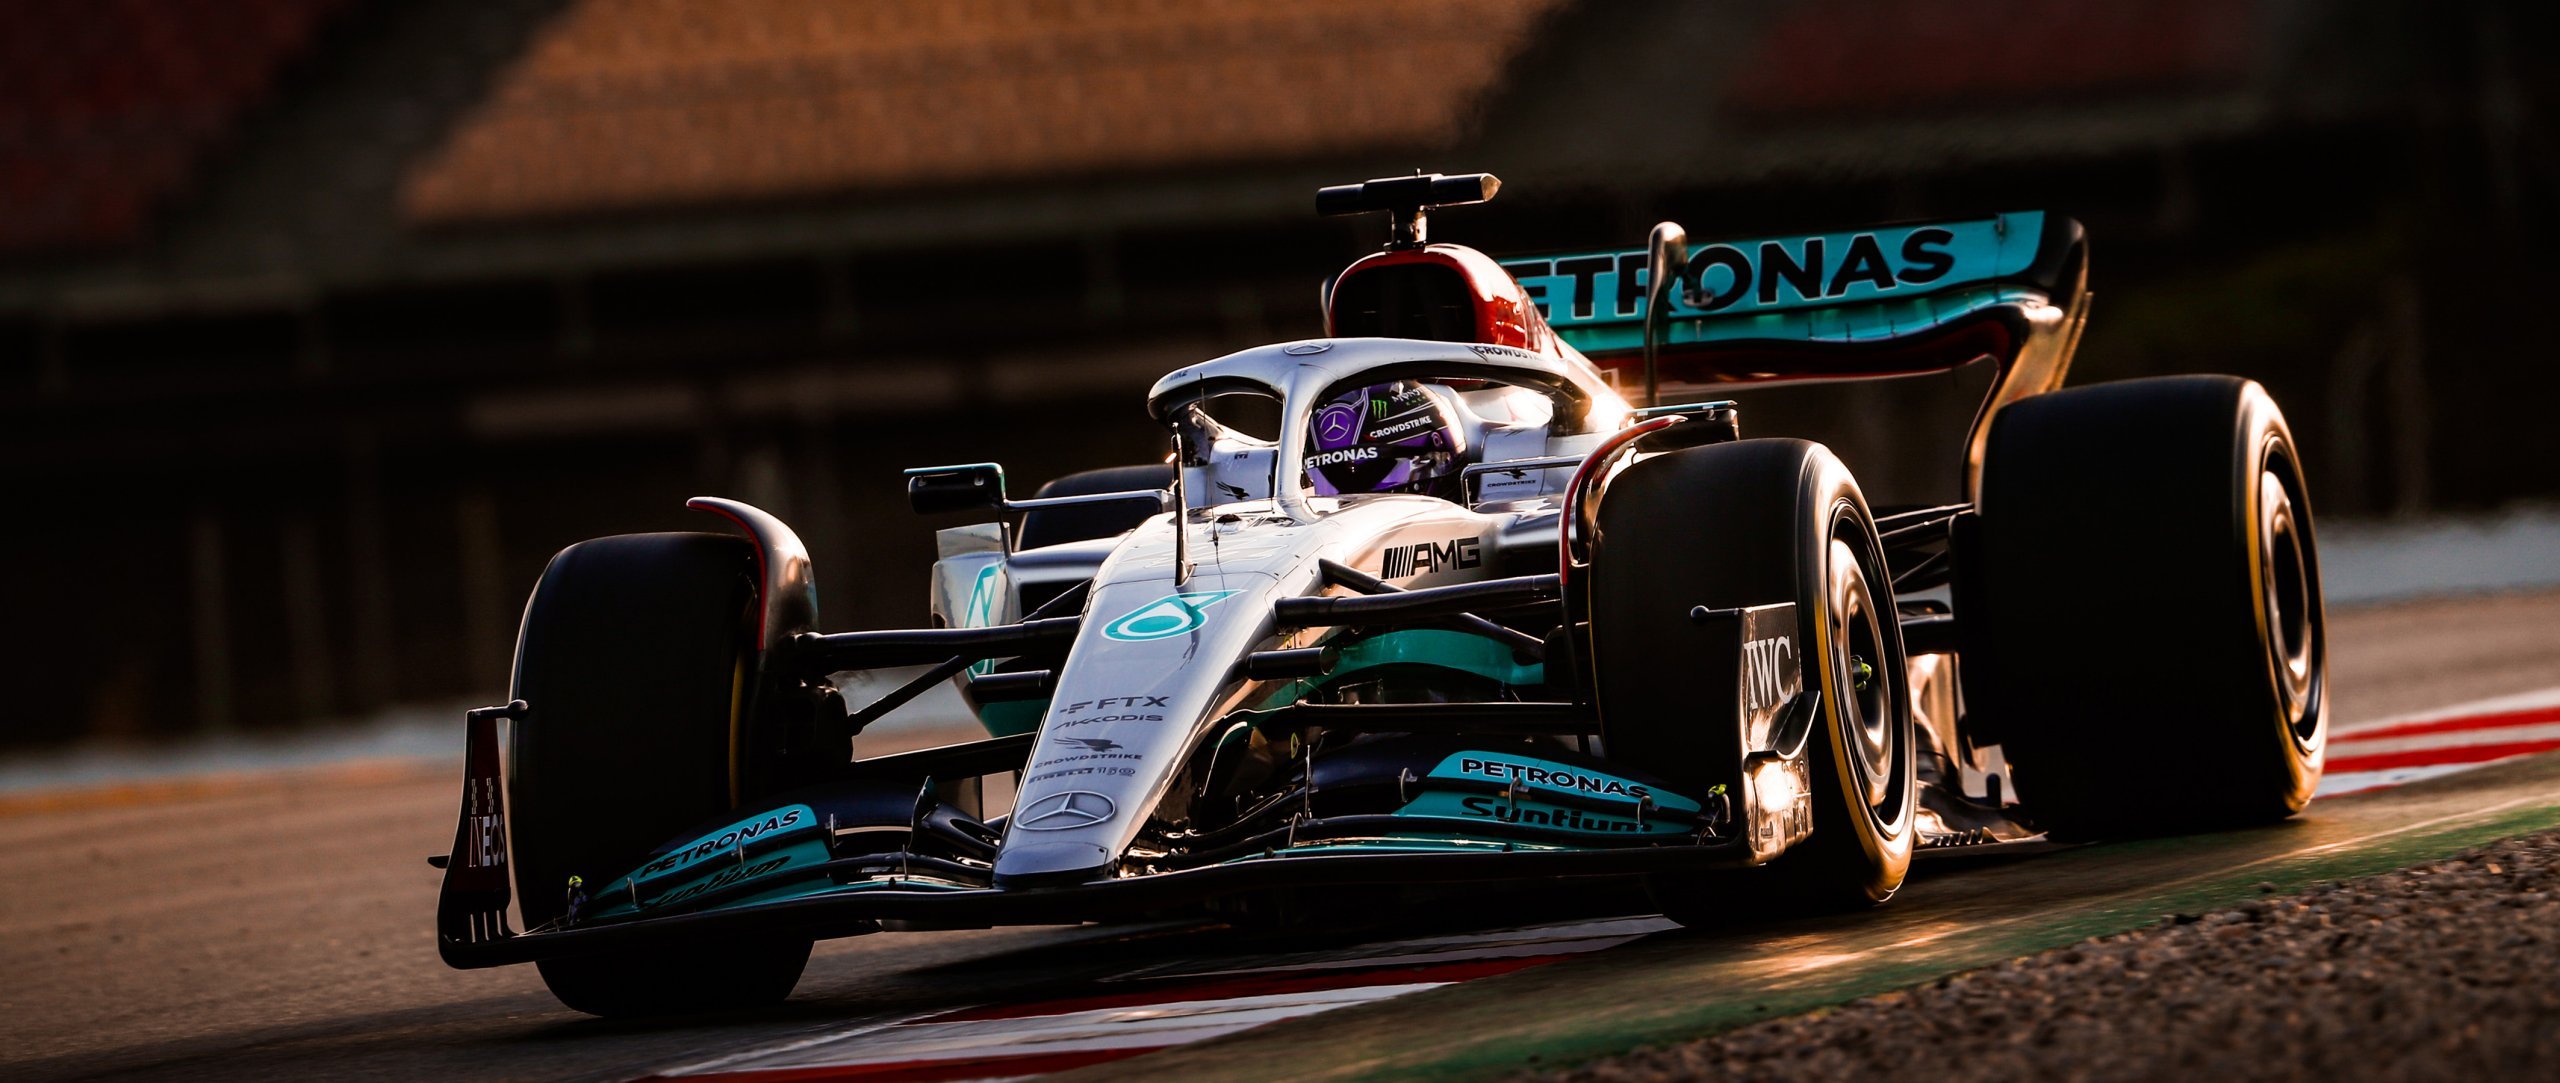 Three Days Of Learning For The Mercedes AMG Petronas F1 Team In Barcelona